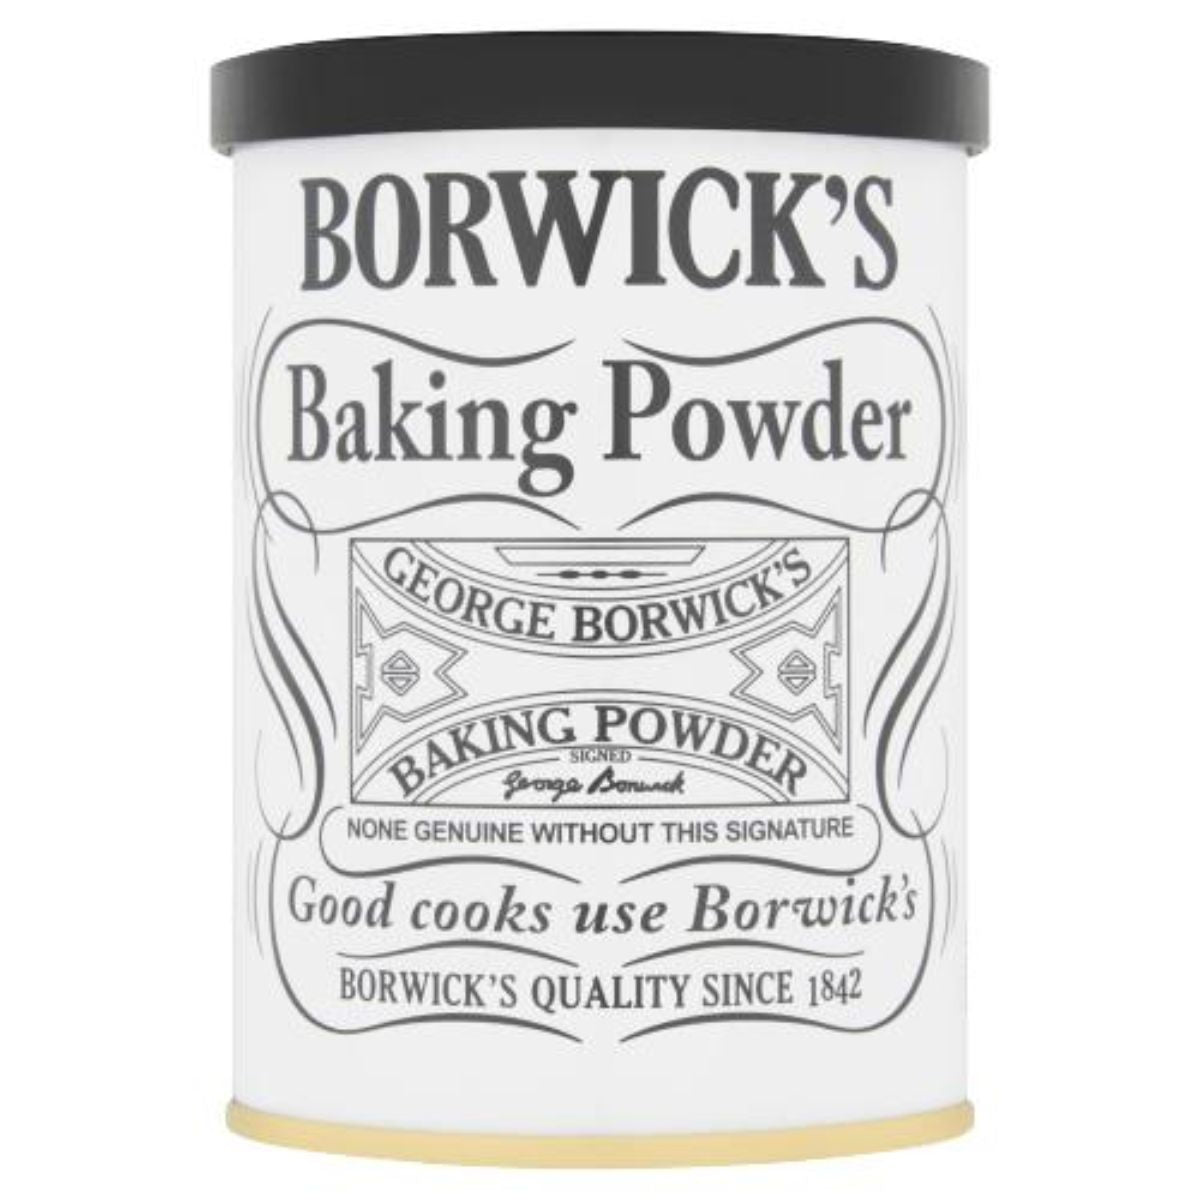 A container of Borwicks - Baking Powder - 100g with the brand's logo and the tagline "good cooks use Borwicks".